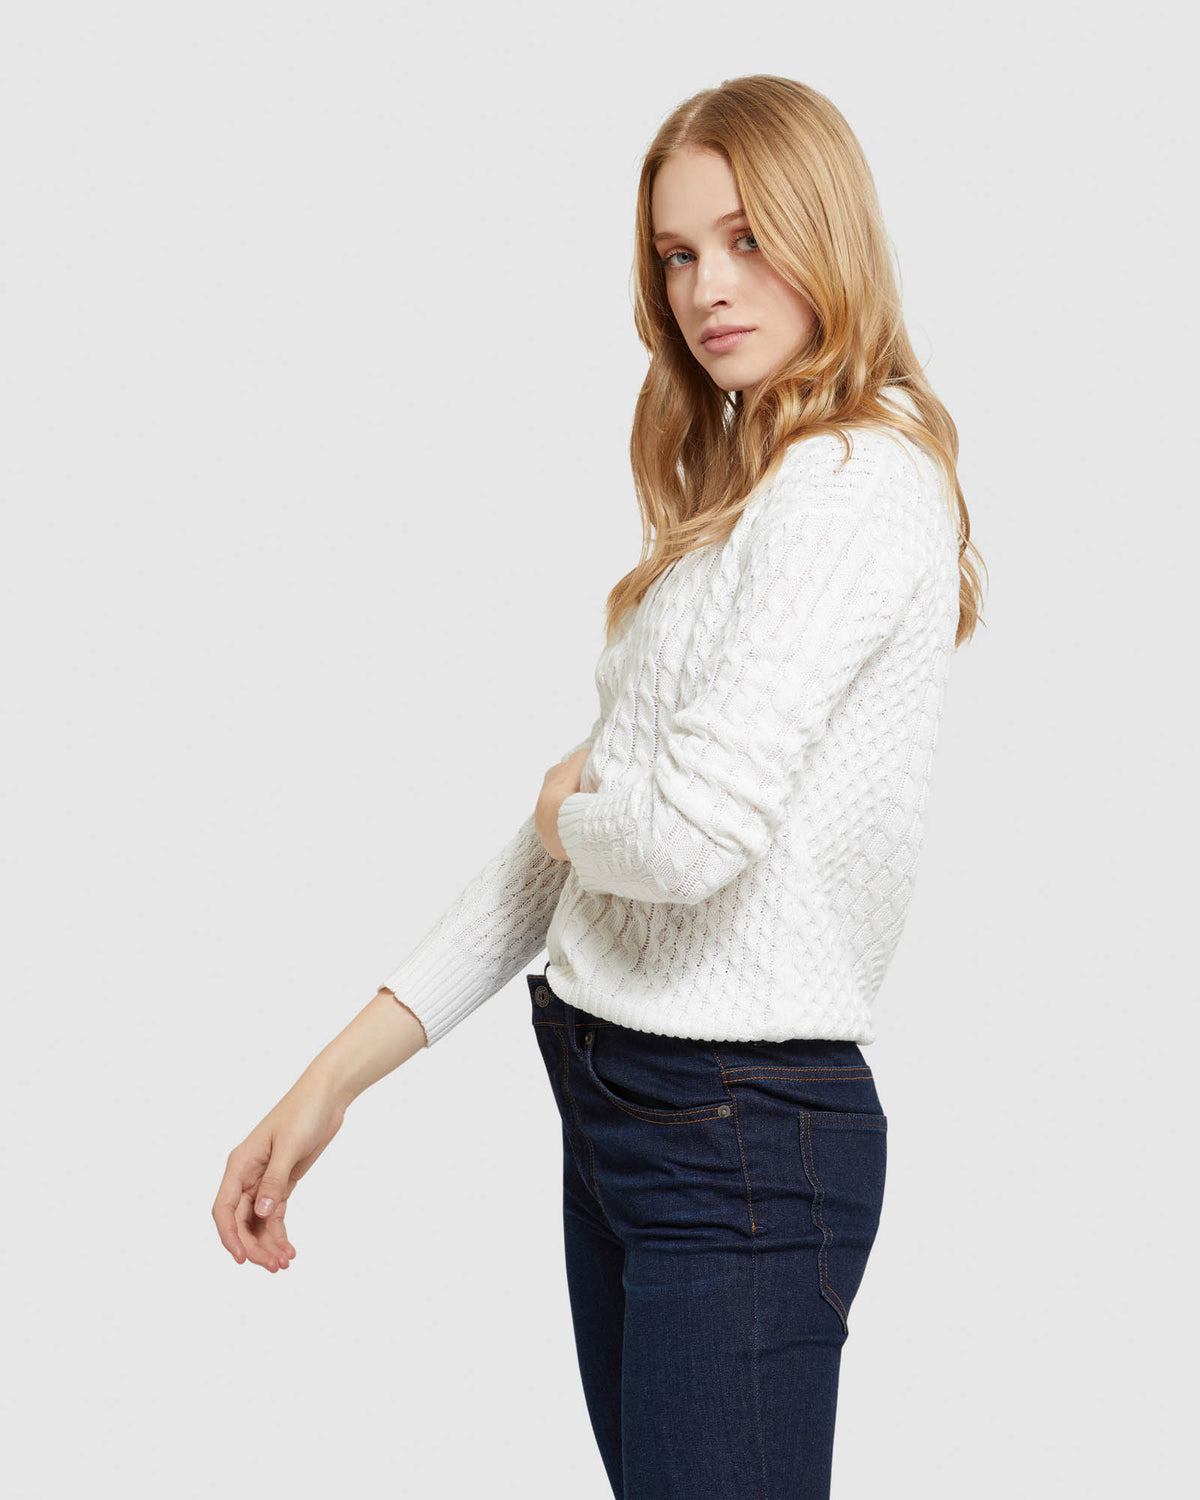 SONIA CABLE KNIT - PREORDER (~1-2 weeks) WOMENS KNITWEAR